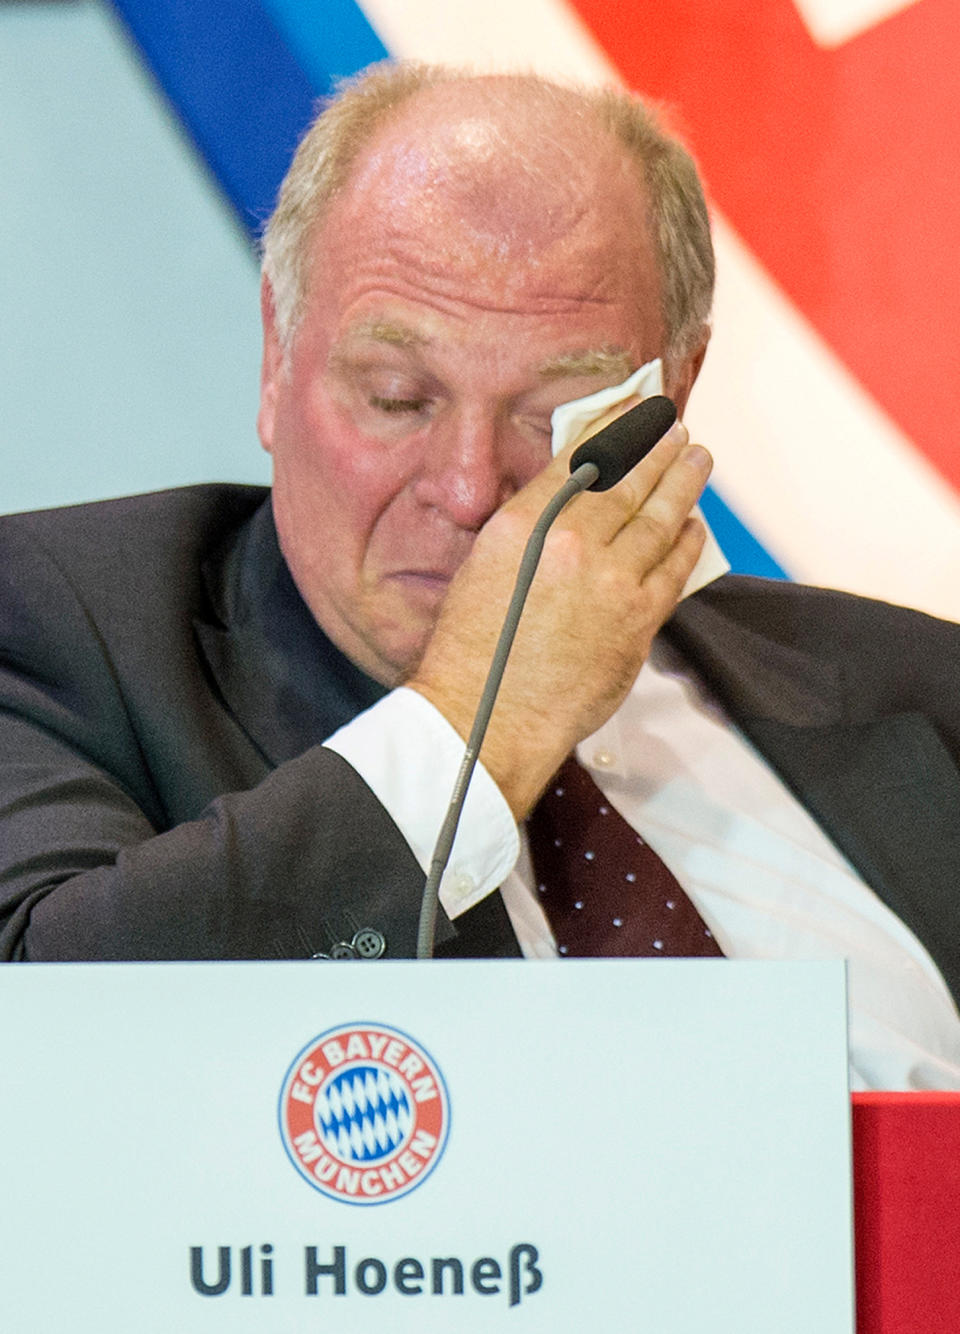 FILE - In this Nov. 13, 2013 file picture the president of German Bundesliga soccer club Bayern Munich Uli Hoeness attends the annual meeting of the club in Munich, Germany . Bayern Munich president Uli Hoeness goes on trial Monday March 10, 2014 on tax evasion charges that could land the German footballing legend in prison. Bavarian prosecutors filed charges against Hoeness last year after he reported himself to authorities over a previously undeclared Swiss bank account. Munich daily Sueddeutsche Zeitung, citing the still-secret indictment, reported last month that prosecutors believe Hoeness dodged up to 3.5 million euros (US $4.9 million) in tax. (AP Photo/dpa,Marc Mueller,File)